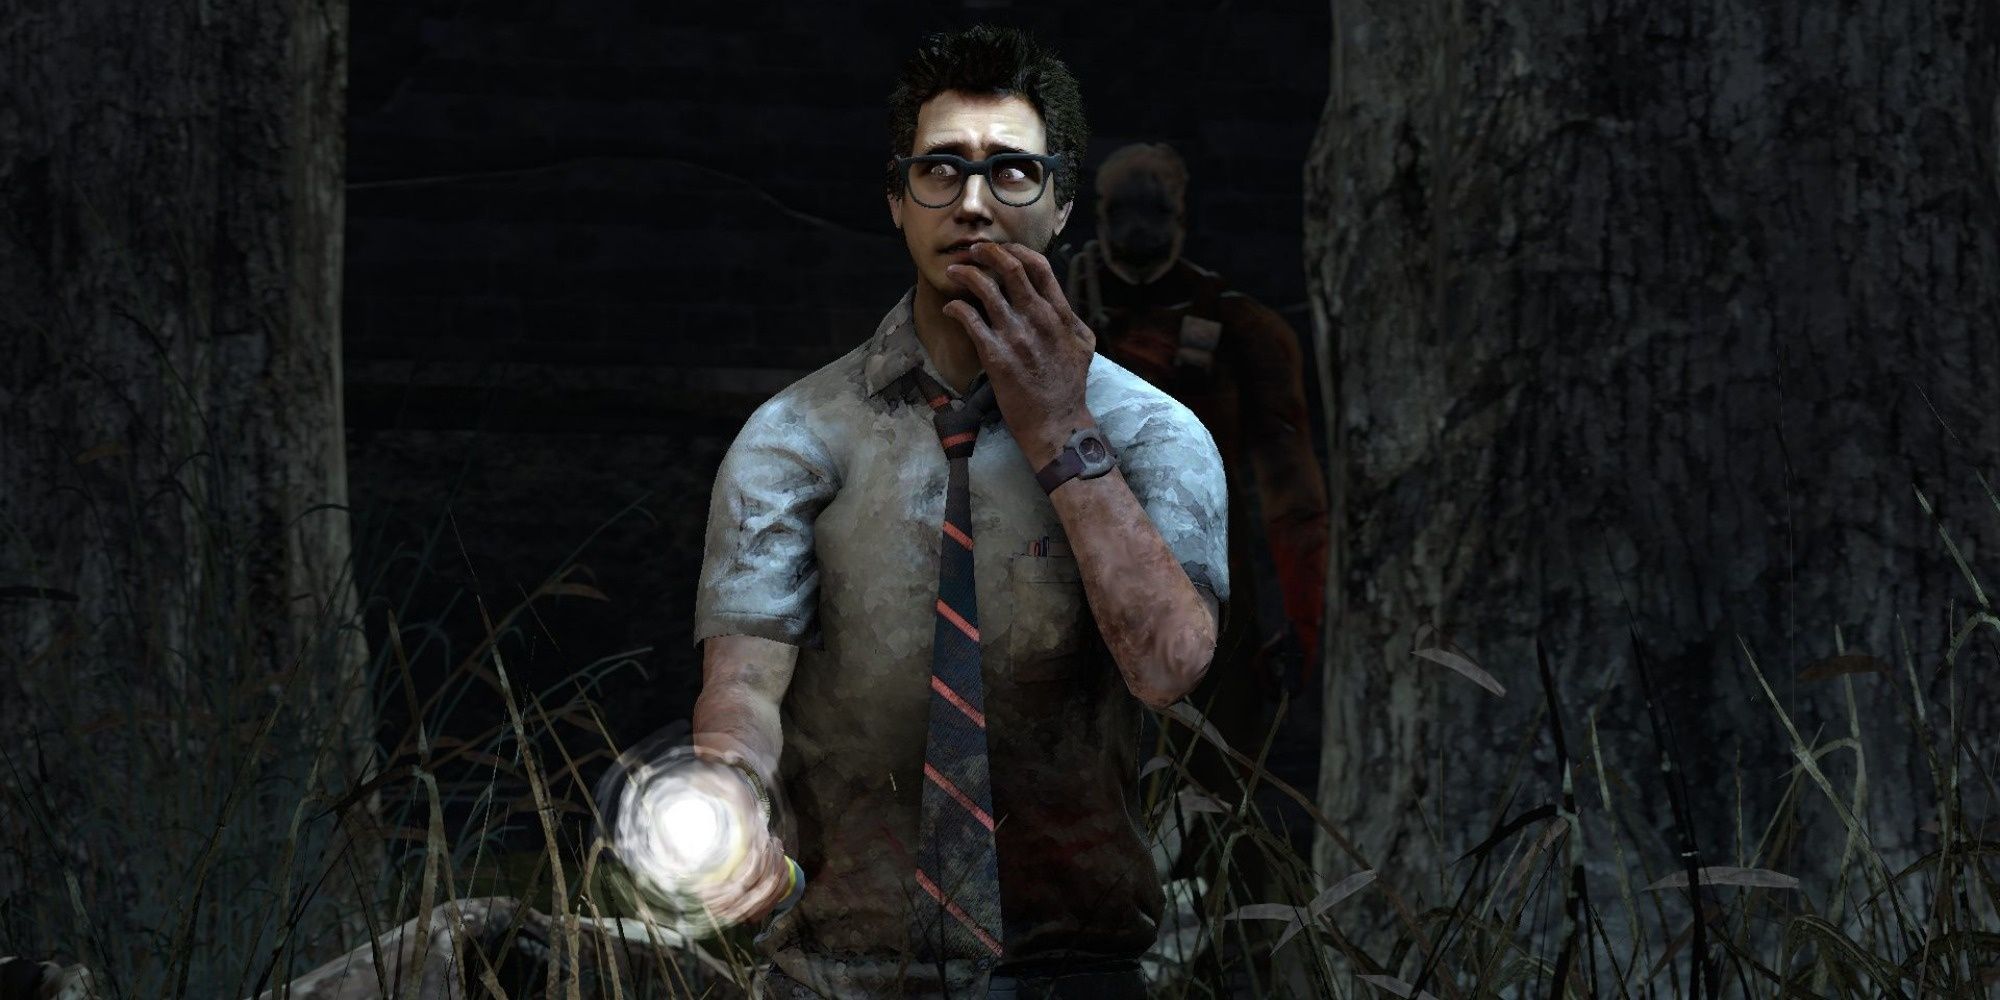 Dwight Fairfield Dead by Daylight flashlight with Trapper